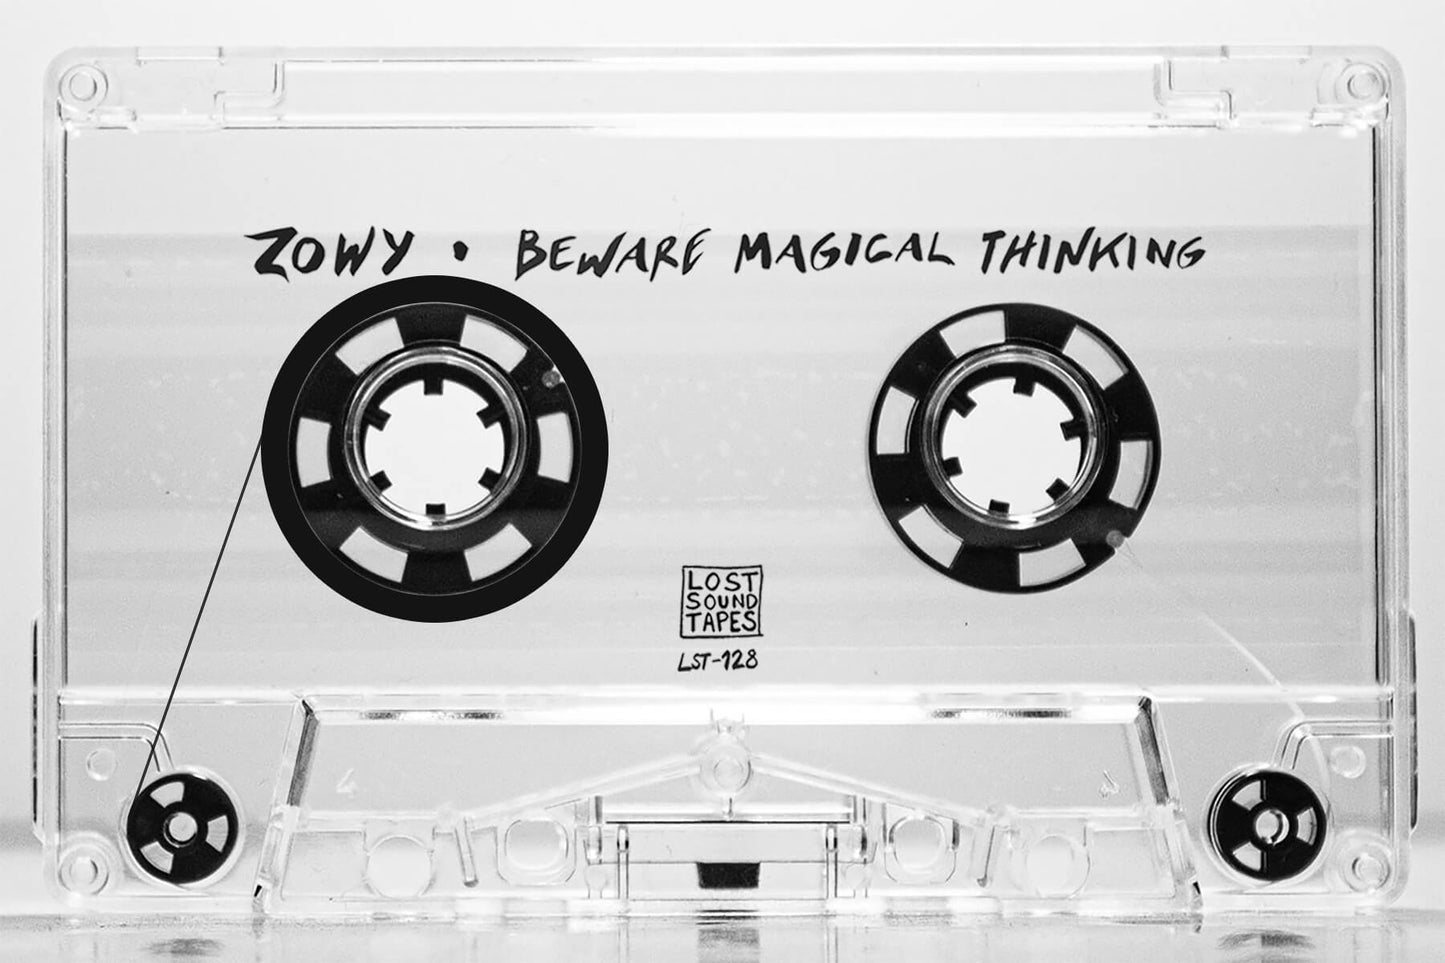 ZOWY "Beware Magical Thinking" cassette tape